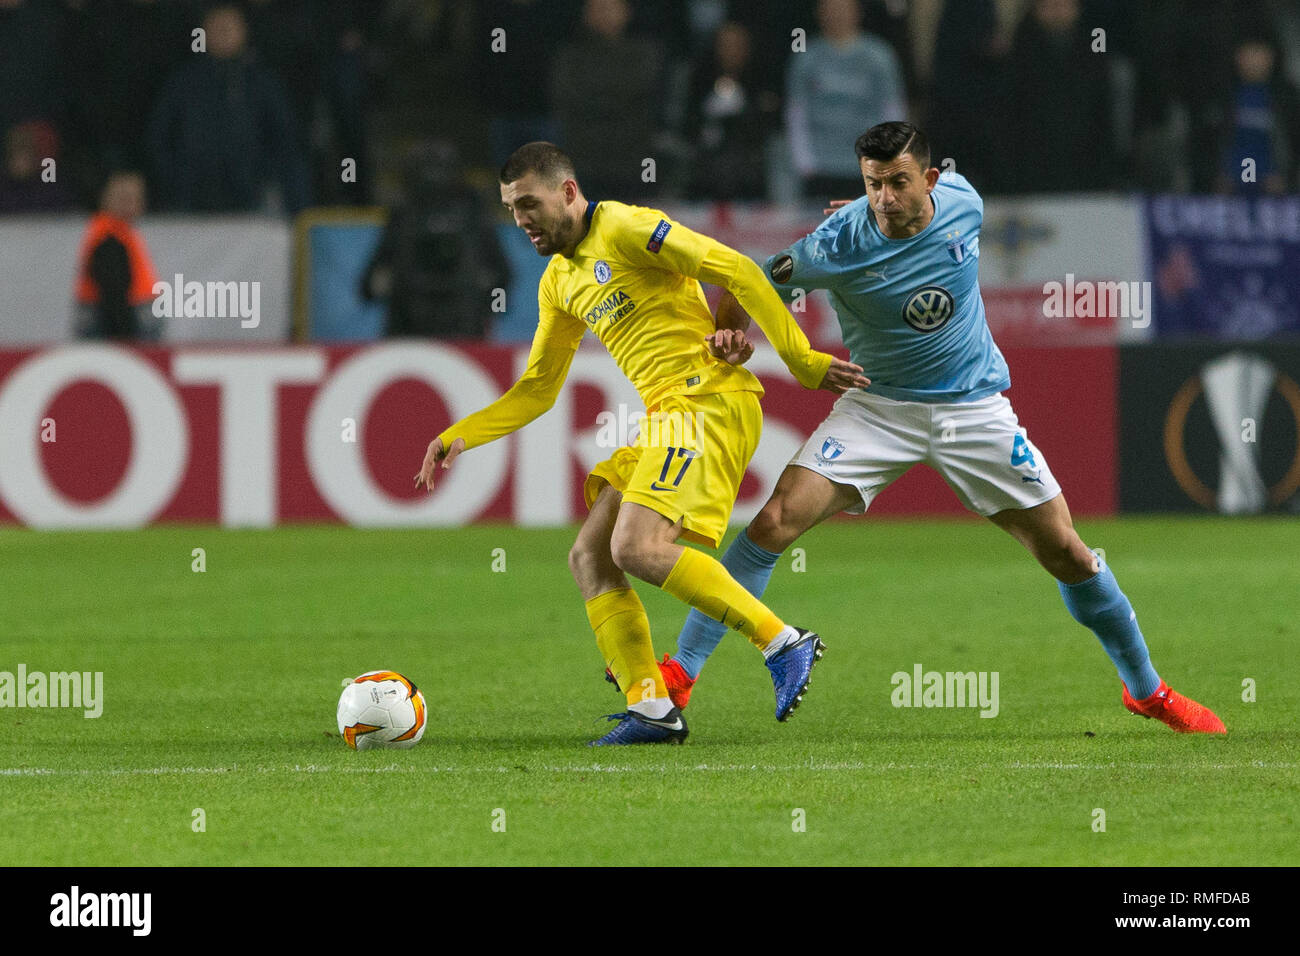 Malmo, Sweden. 14th Feb, 2019. Sweden, Malmö, February 24 2019. Mateo Kovacic (17) of Chelsea FC and Behrang Safari (4) of Malmö FF seen during the Europa League round of 32 match between Malmö FF and Chelsea FC at Swedbank Stadion in Malmö. (Photo Credit: Gonzales Photo/Alamy Live News Stock Photo